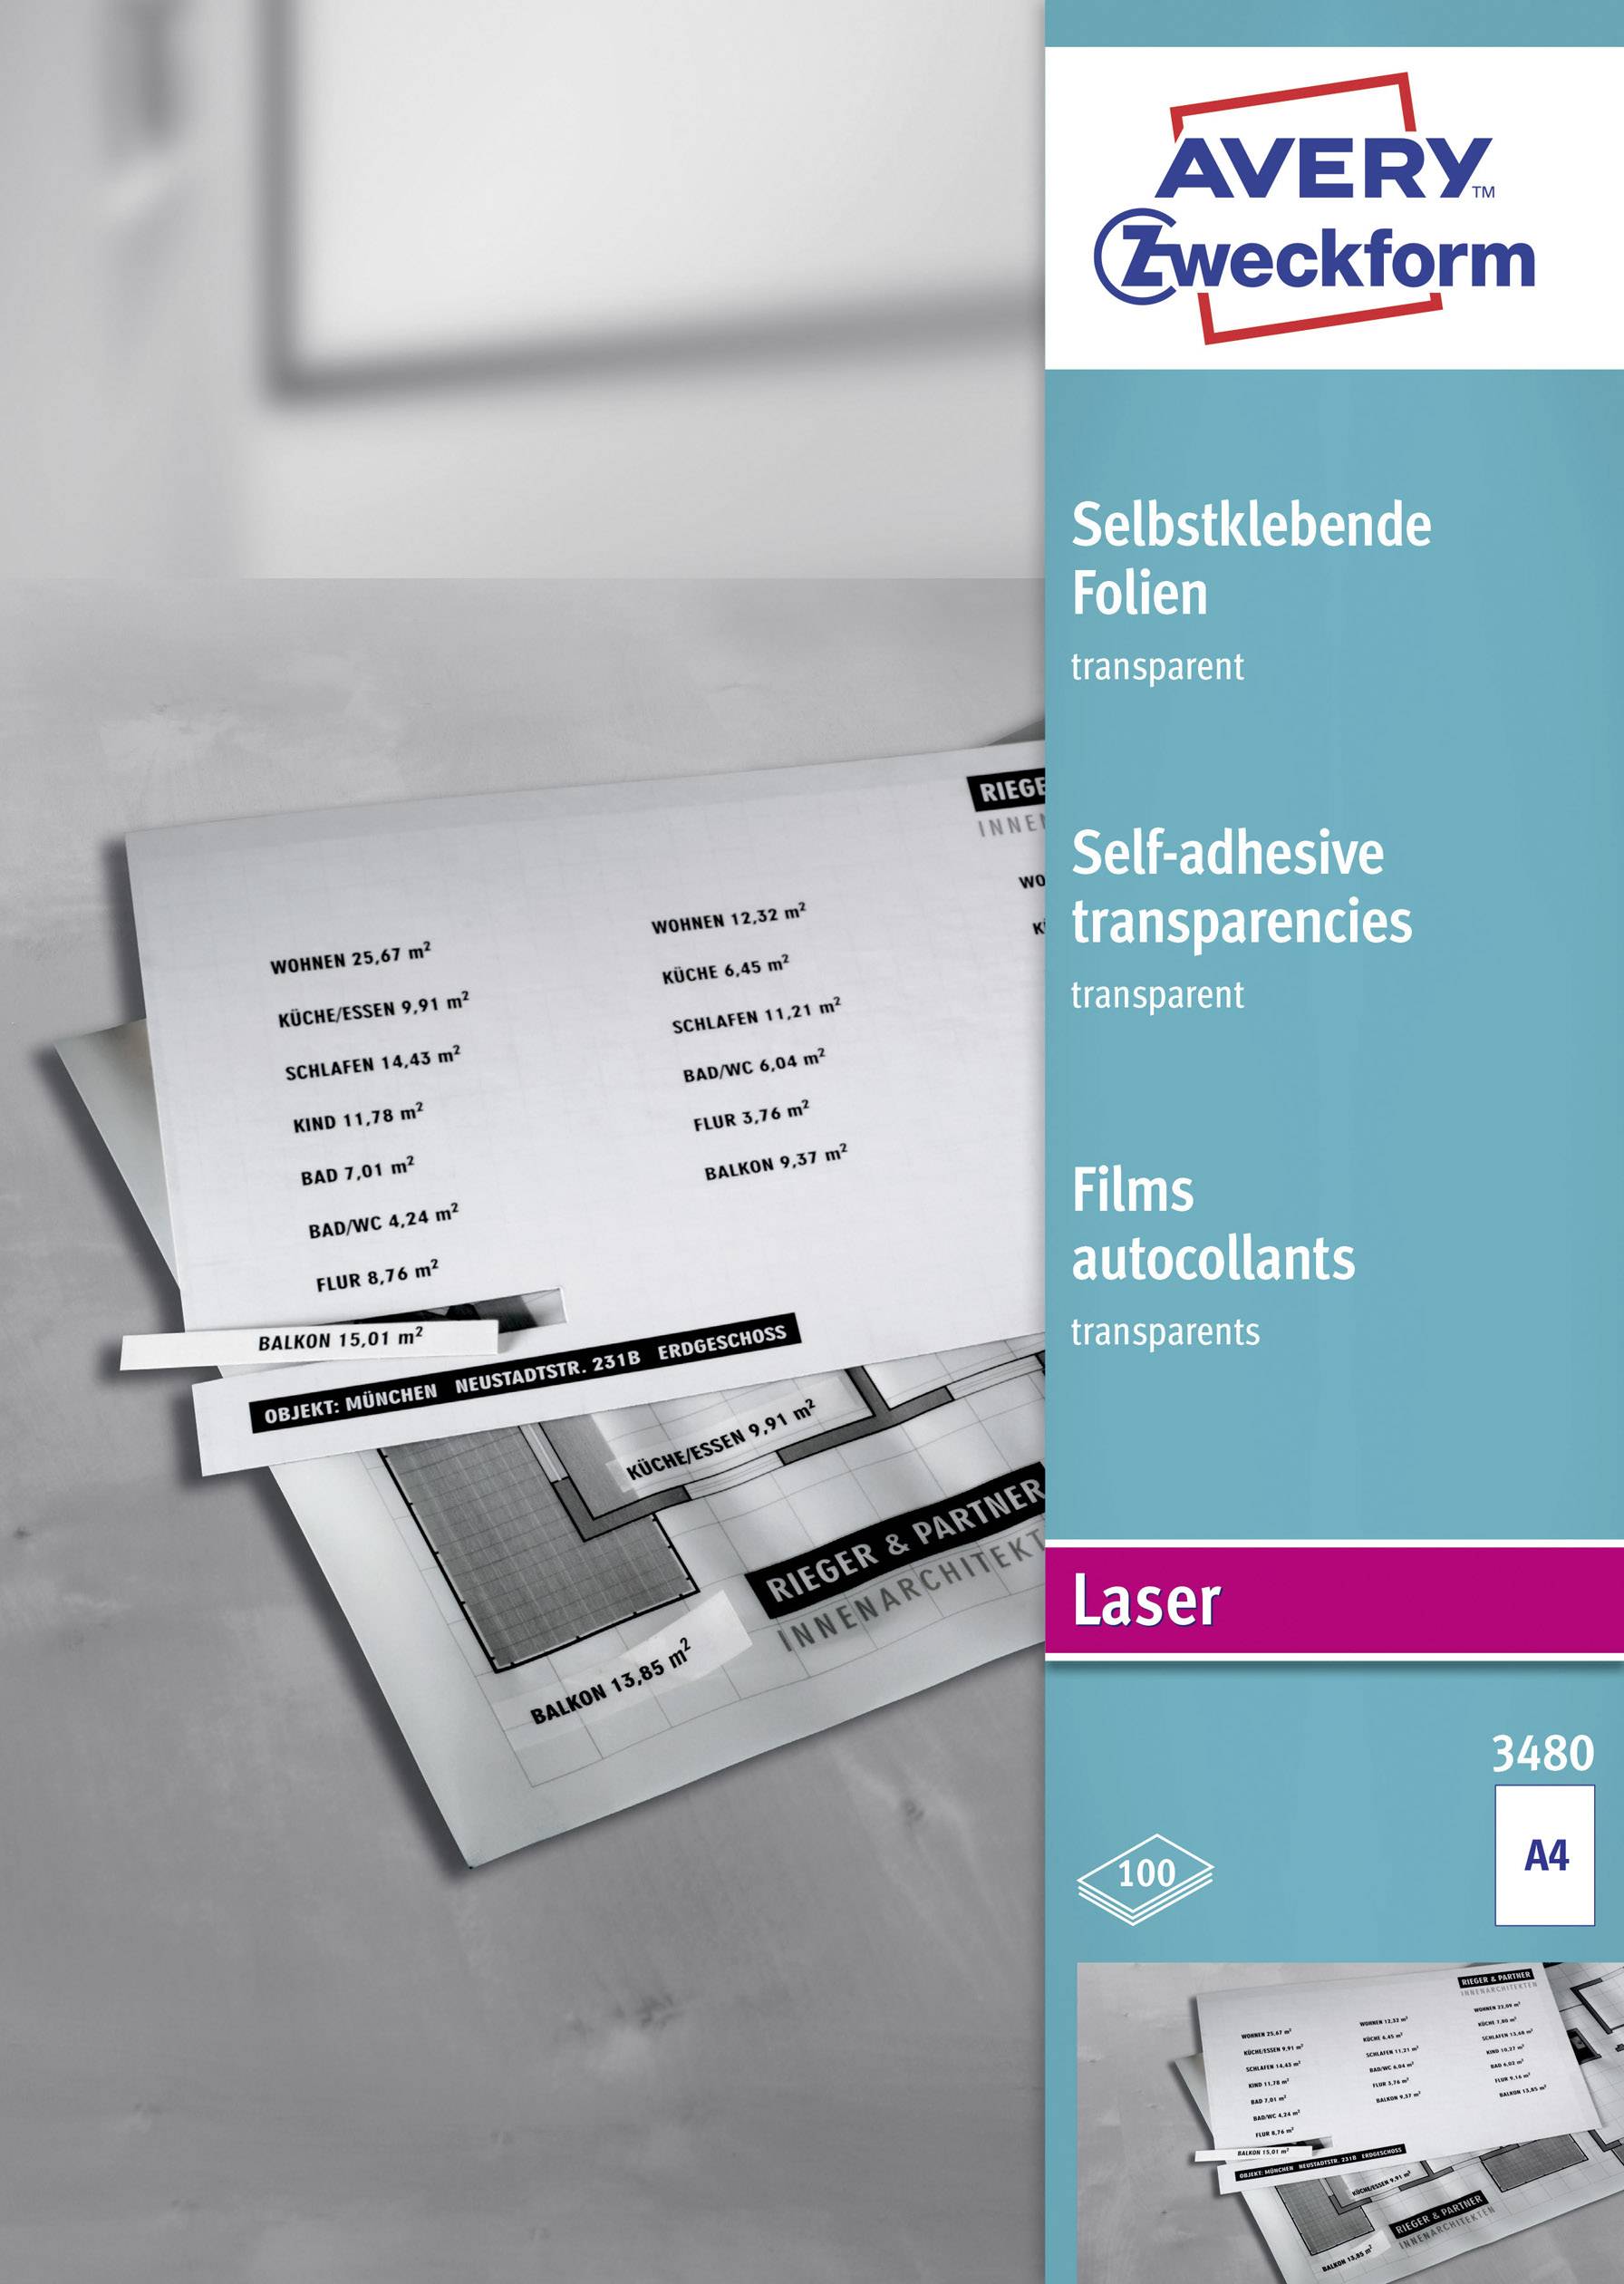 Avery-Zweckform 3480 3480 Self-adhesive film A4 Laser, colour, Laser ...